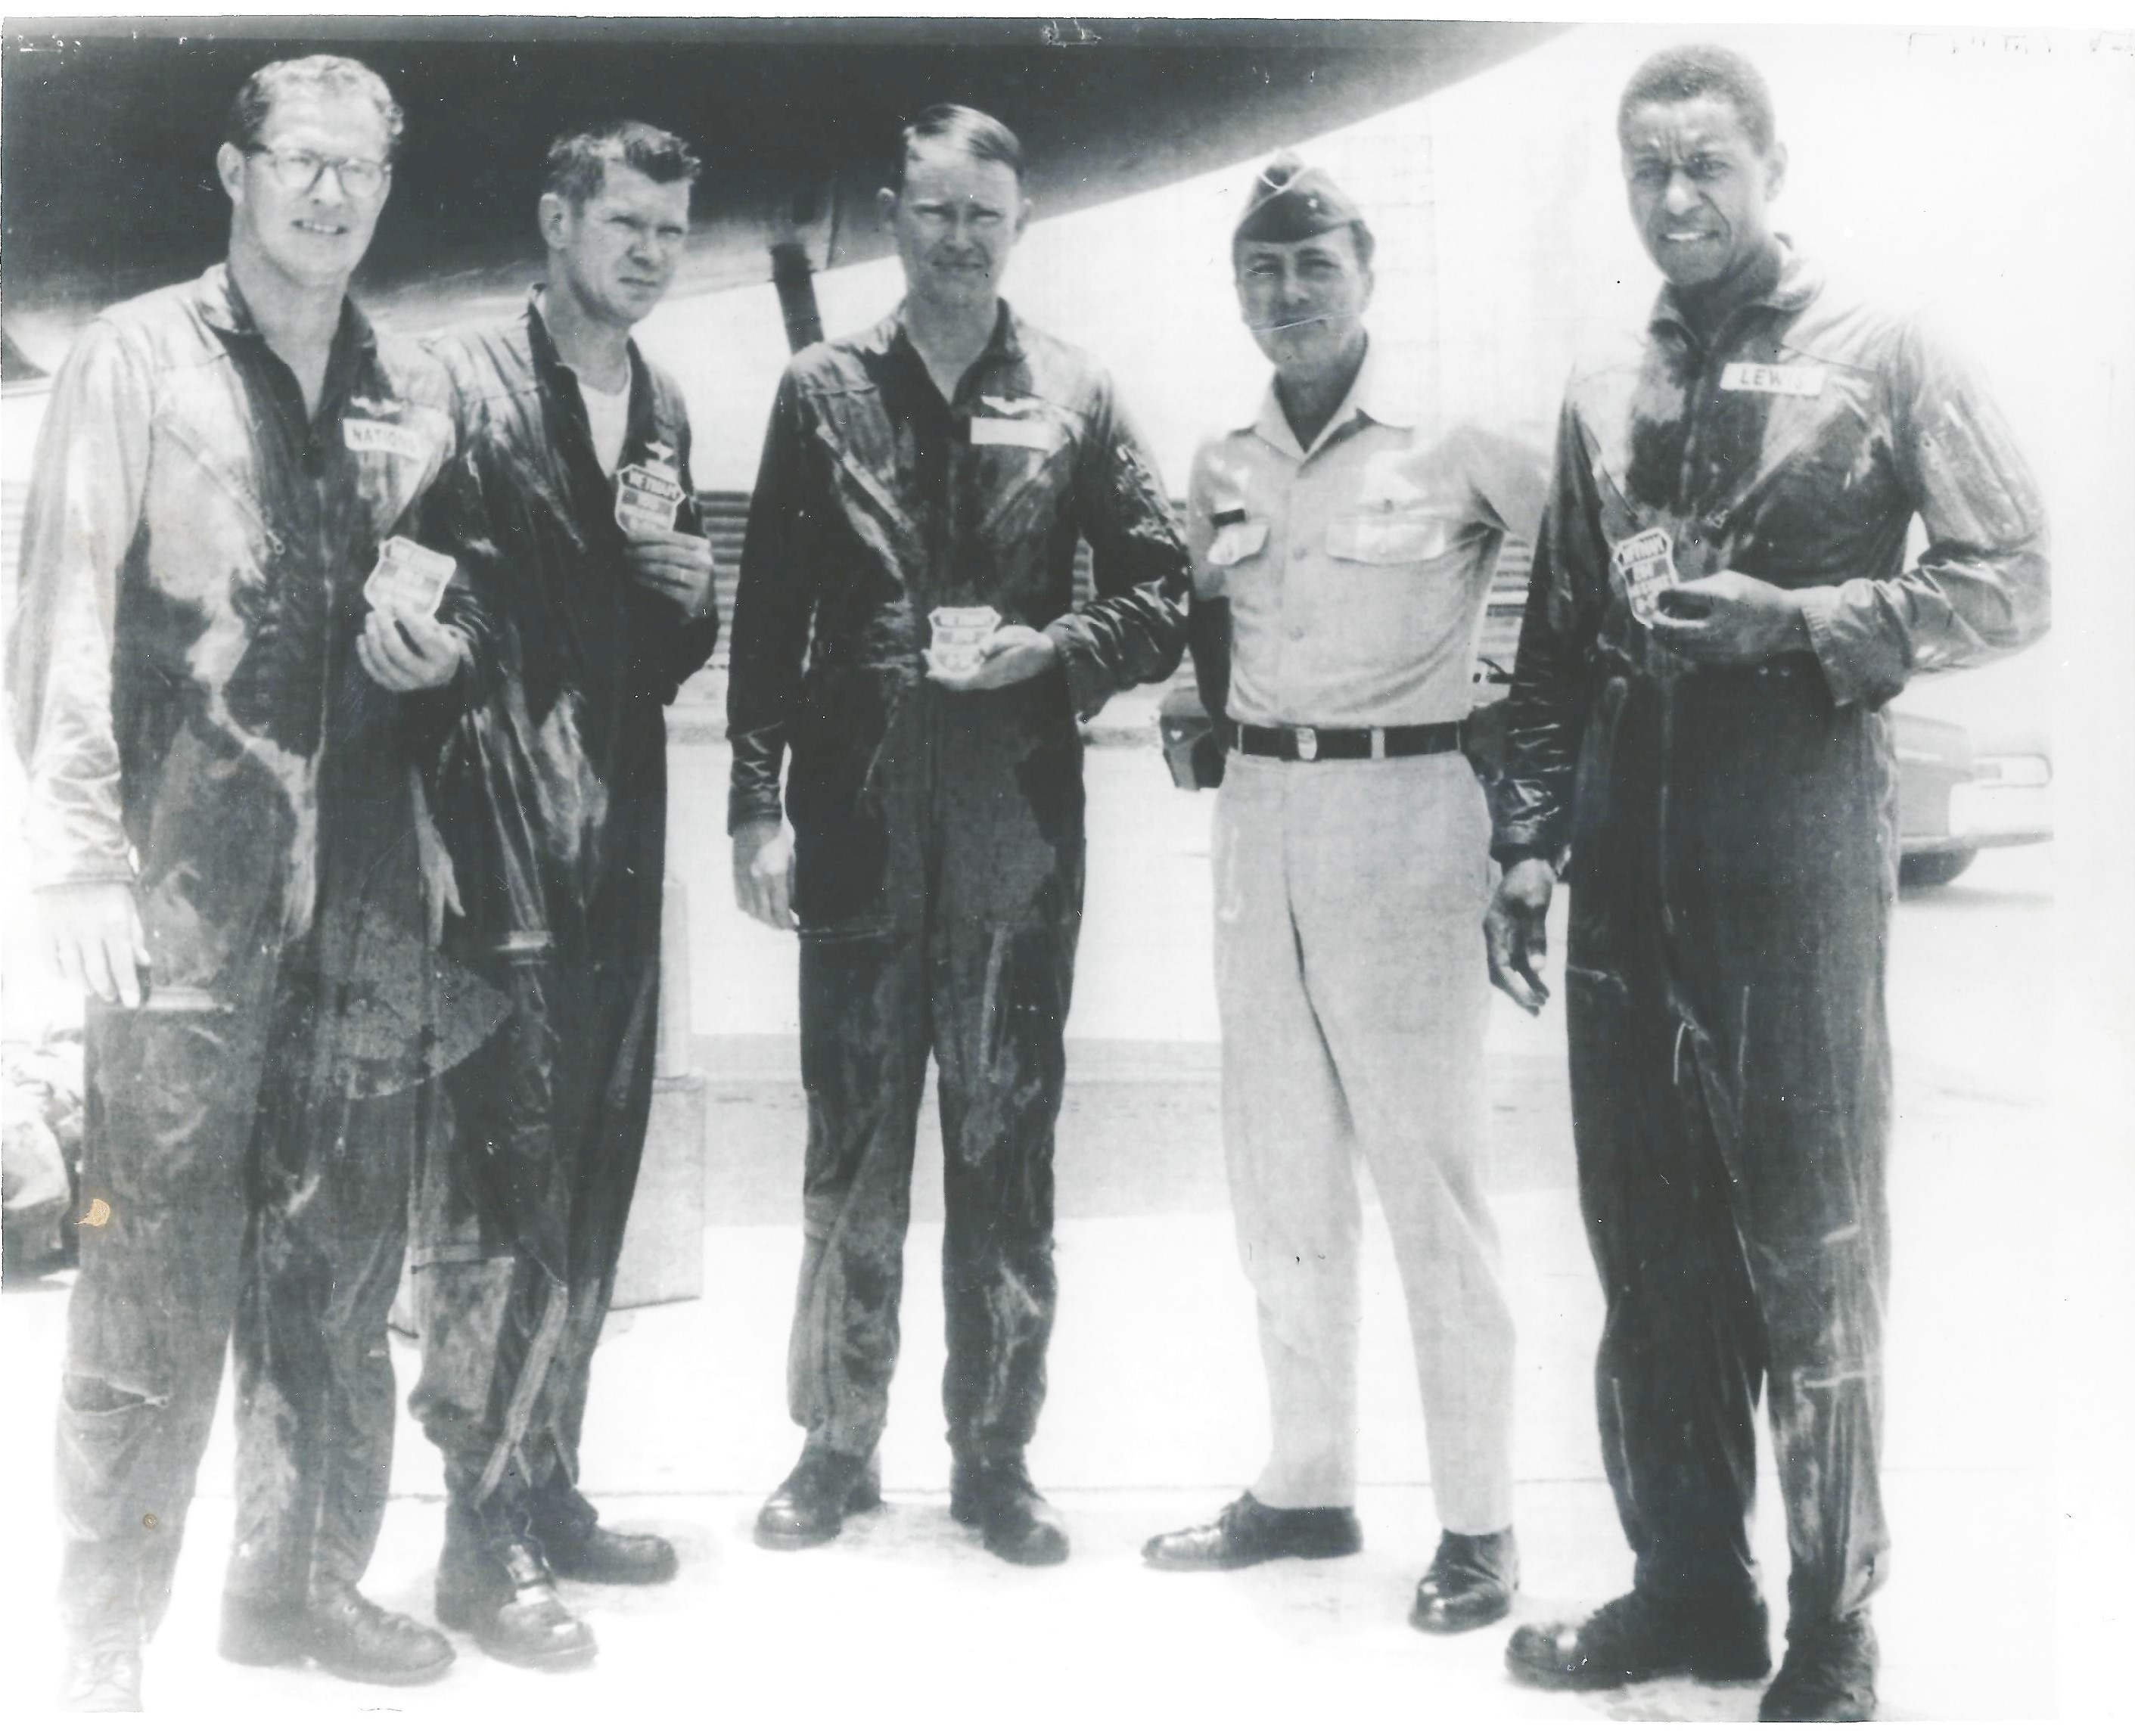 Major Lewix, first from the right, with his crew after completing 200 combat missions in Vietnam ( photo via Peter Macca)